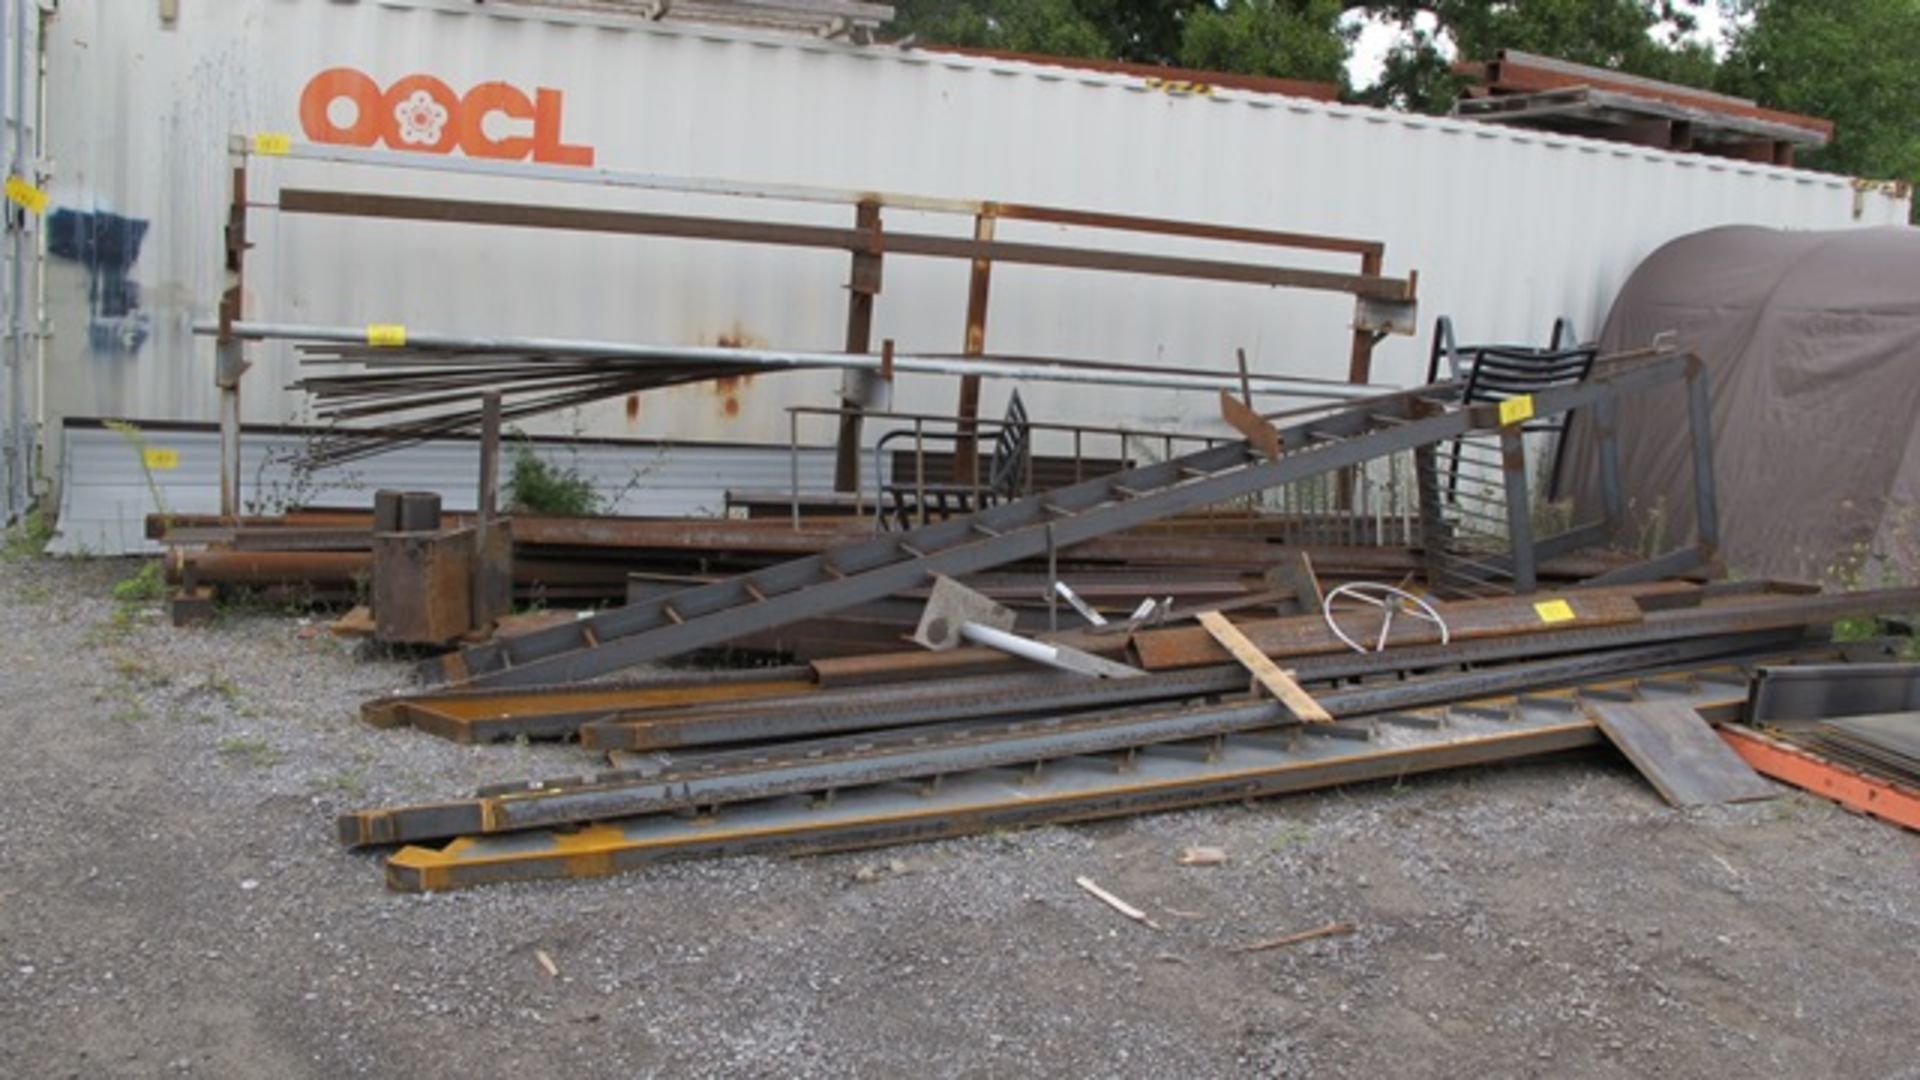 LOT ASST. STEEL LADDERS, RAILS, TUBE ETC. W/STEEL ON ROOF OF CONTAINER (IN YARD)